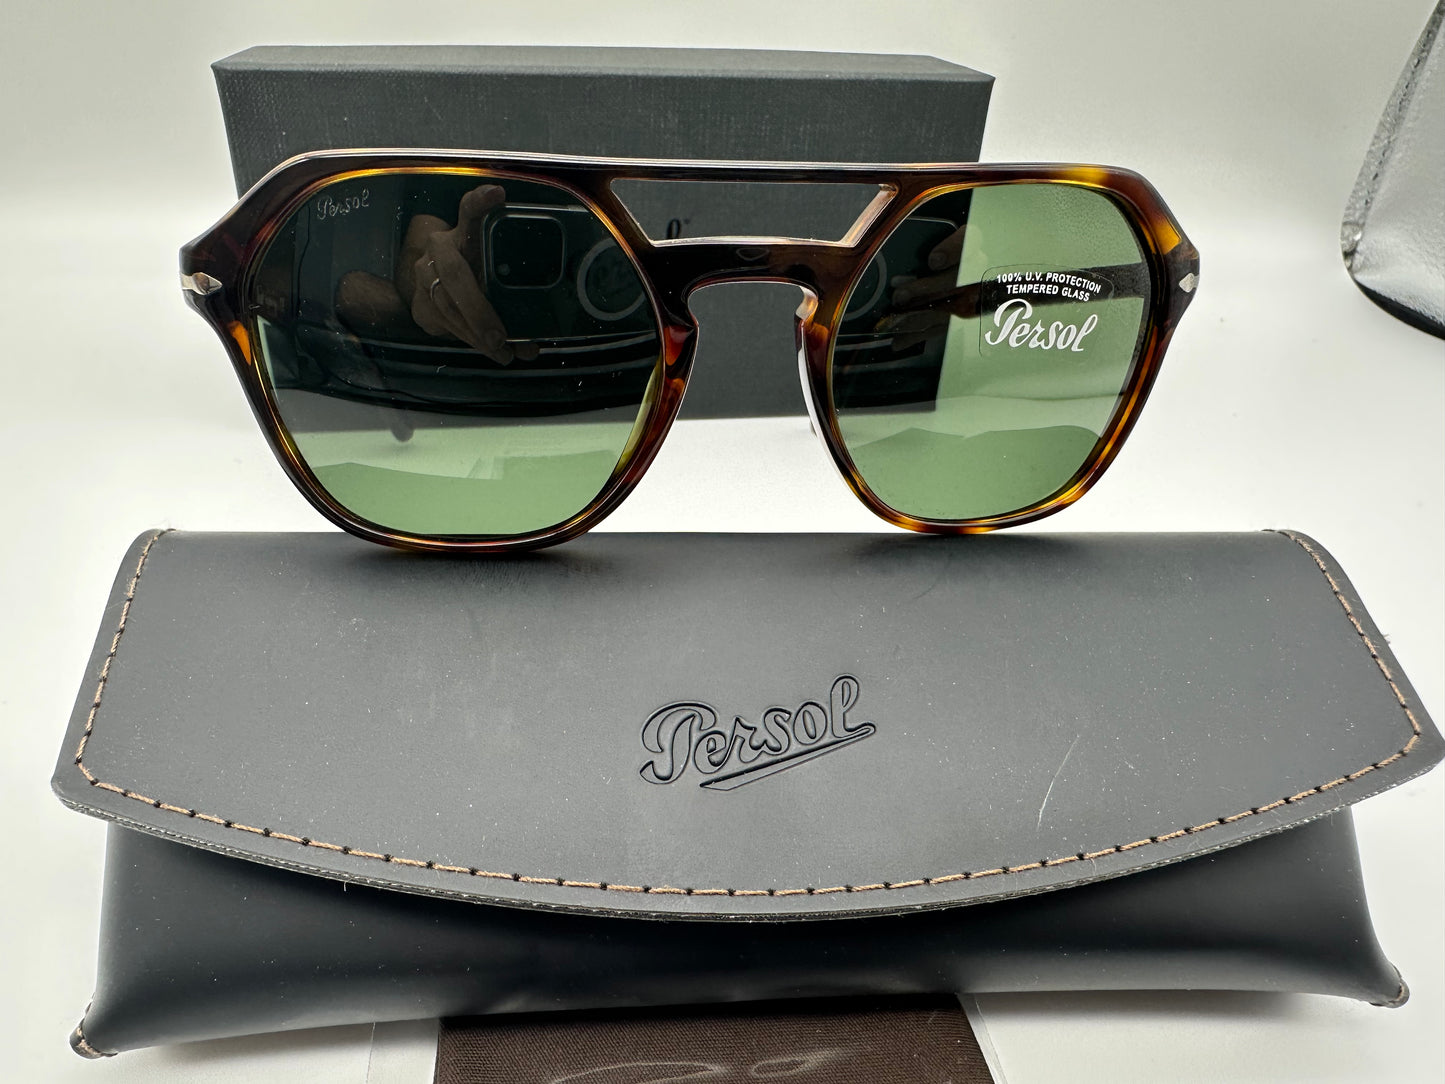 Persol PO 3206S 51mm Havana Green Made in Italy